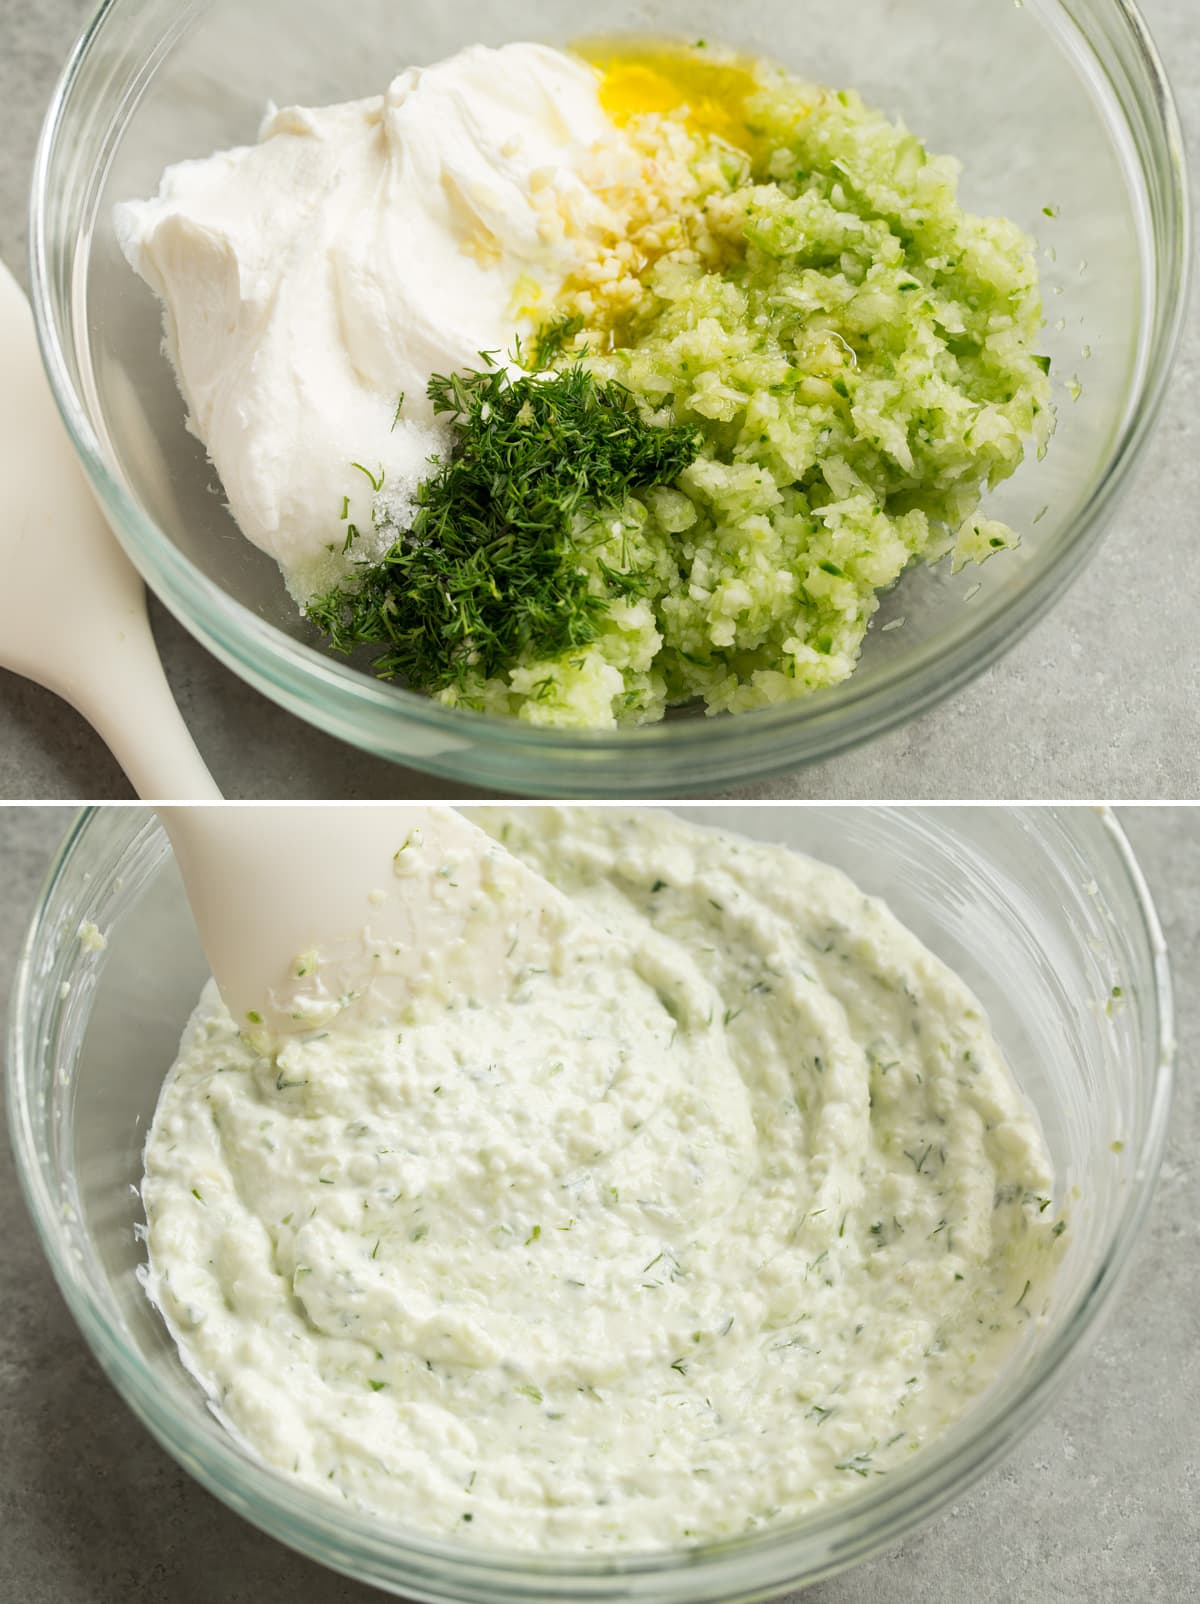 Tzatziki sauce ingredients shown in a mixing bowl before and after blending.